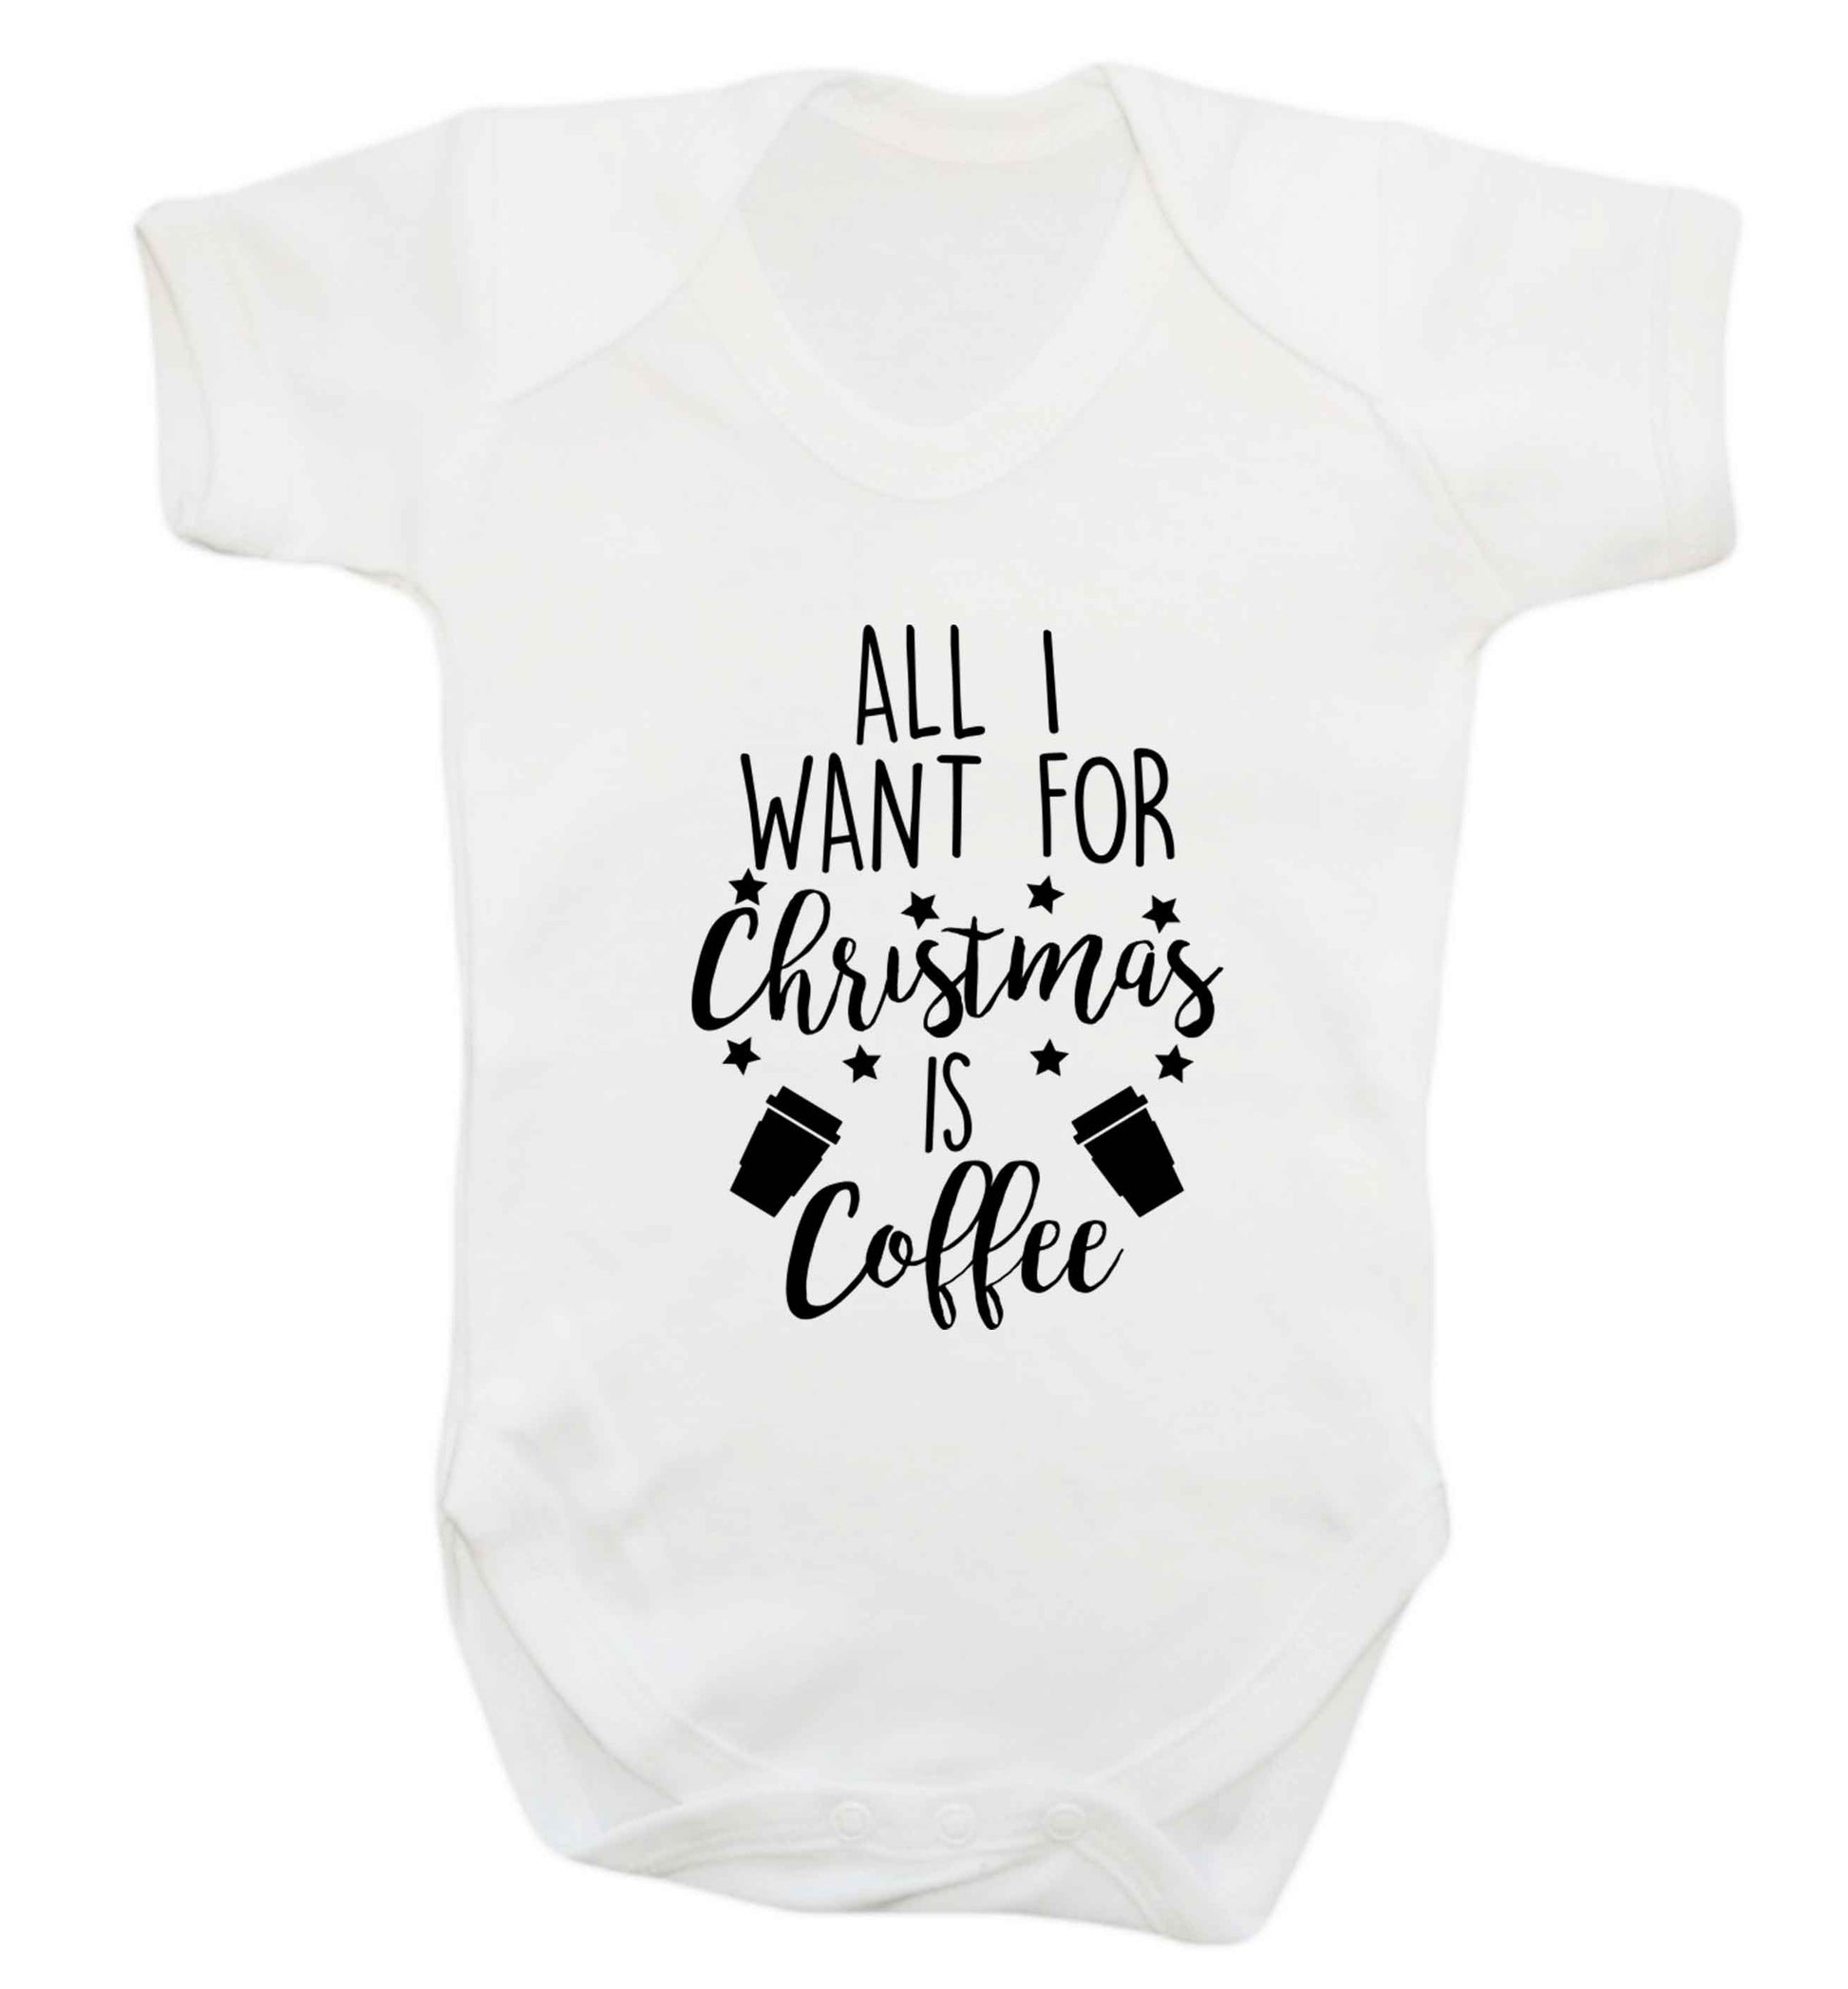 All I want for Christmas is coffee Baby Vest white 18-24 months